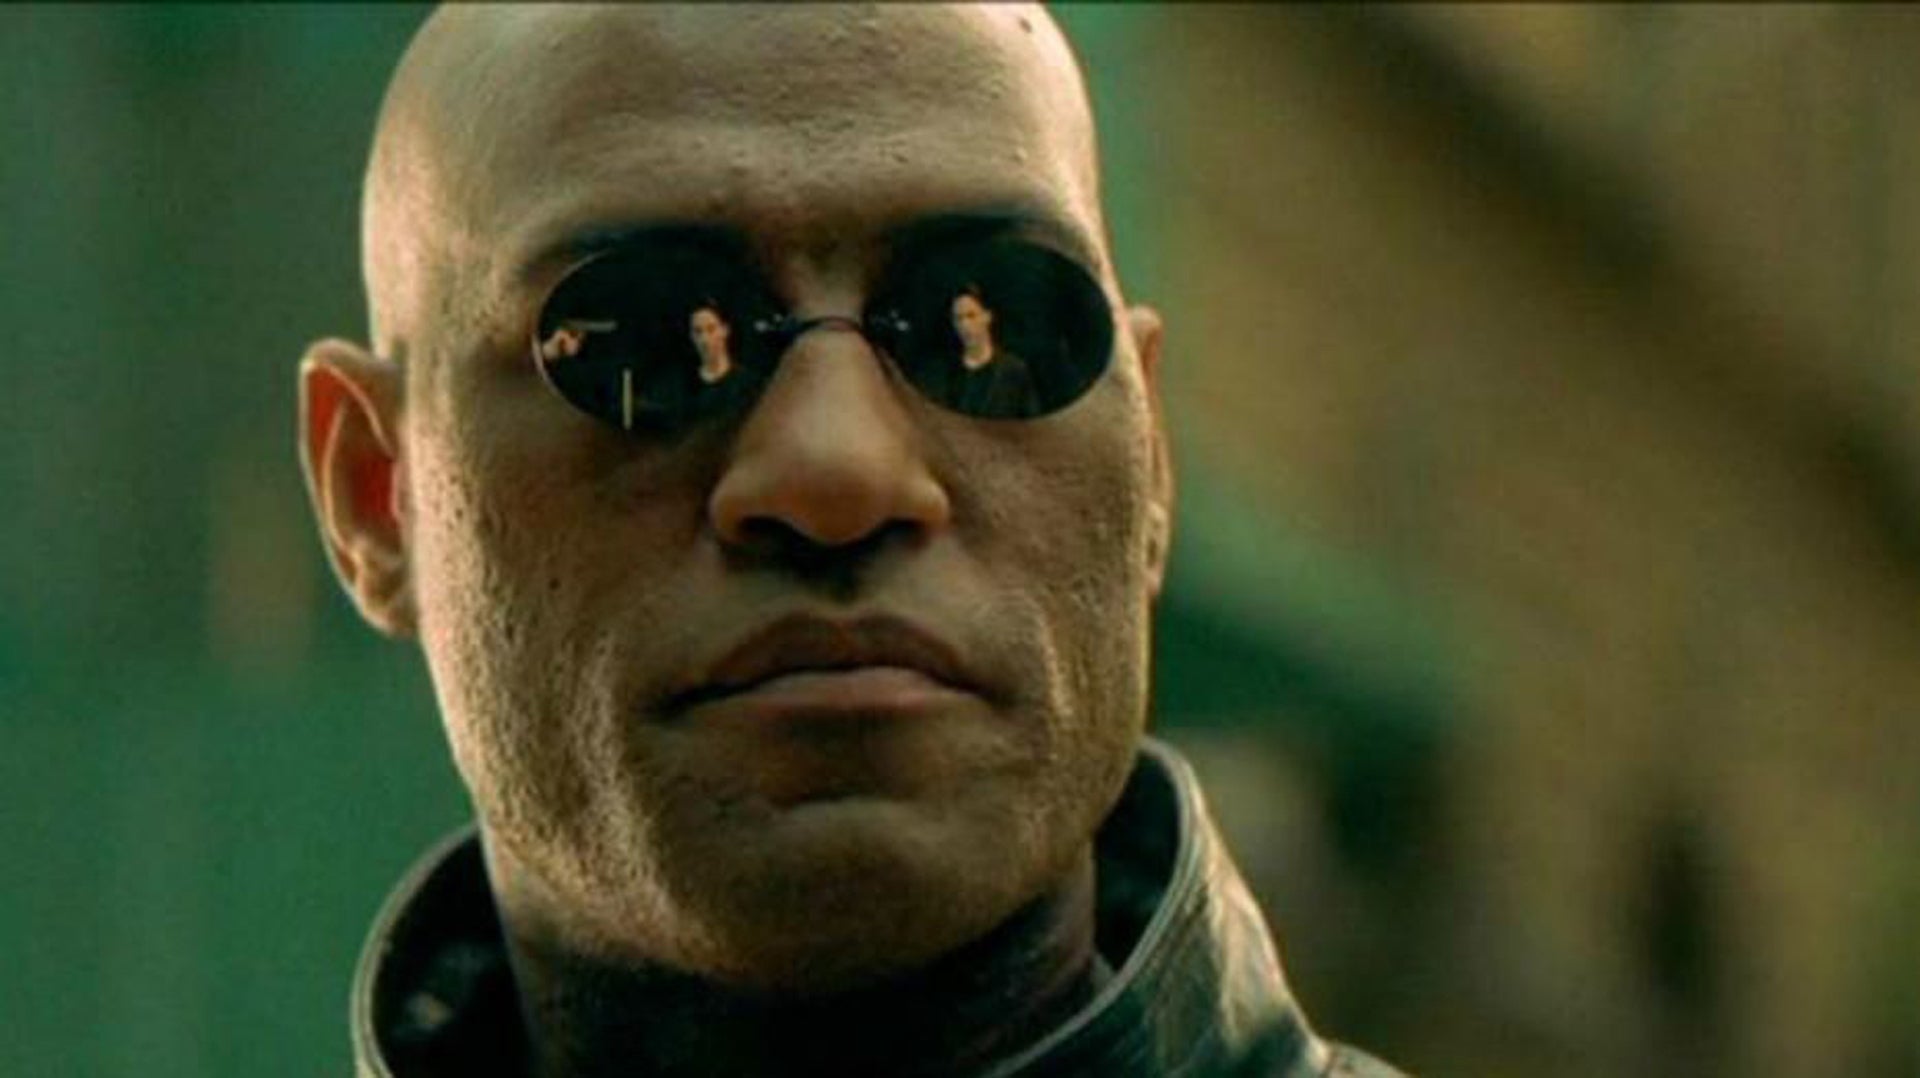 Laurence Fishburne ‘Wasn’t Invited’ To Appear In ‘Matrix 4’